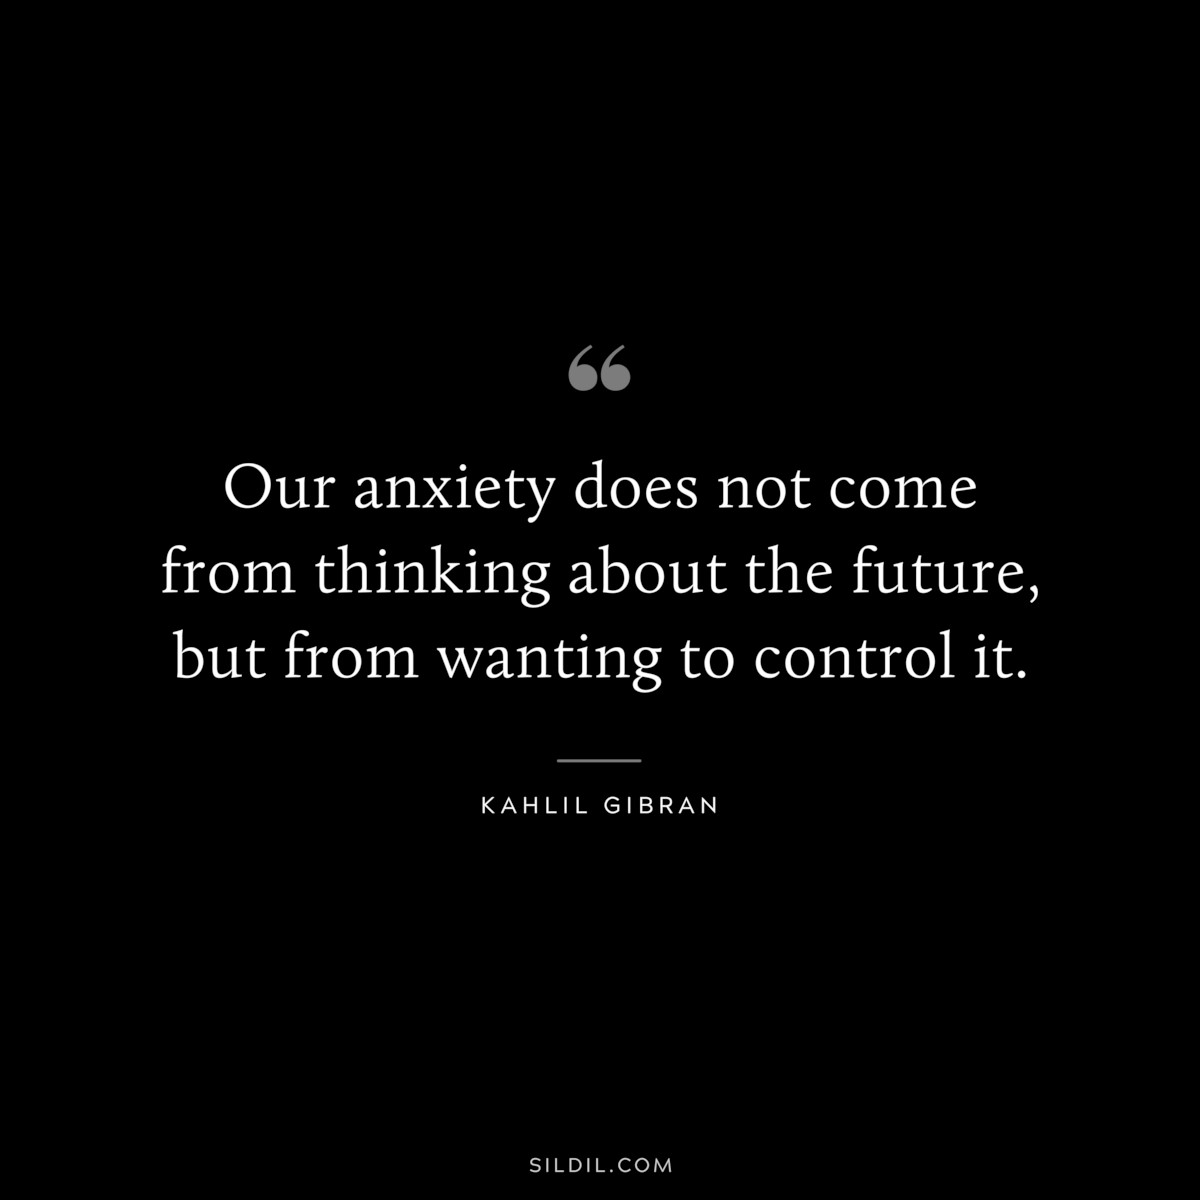 Our anxiety does not come from thinking about the future, but from wanting to control it. ― Kahlil Gibran